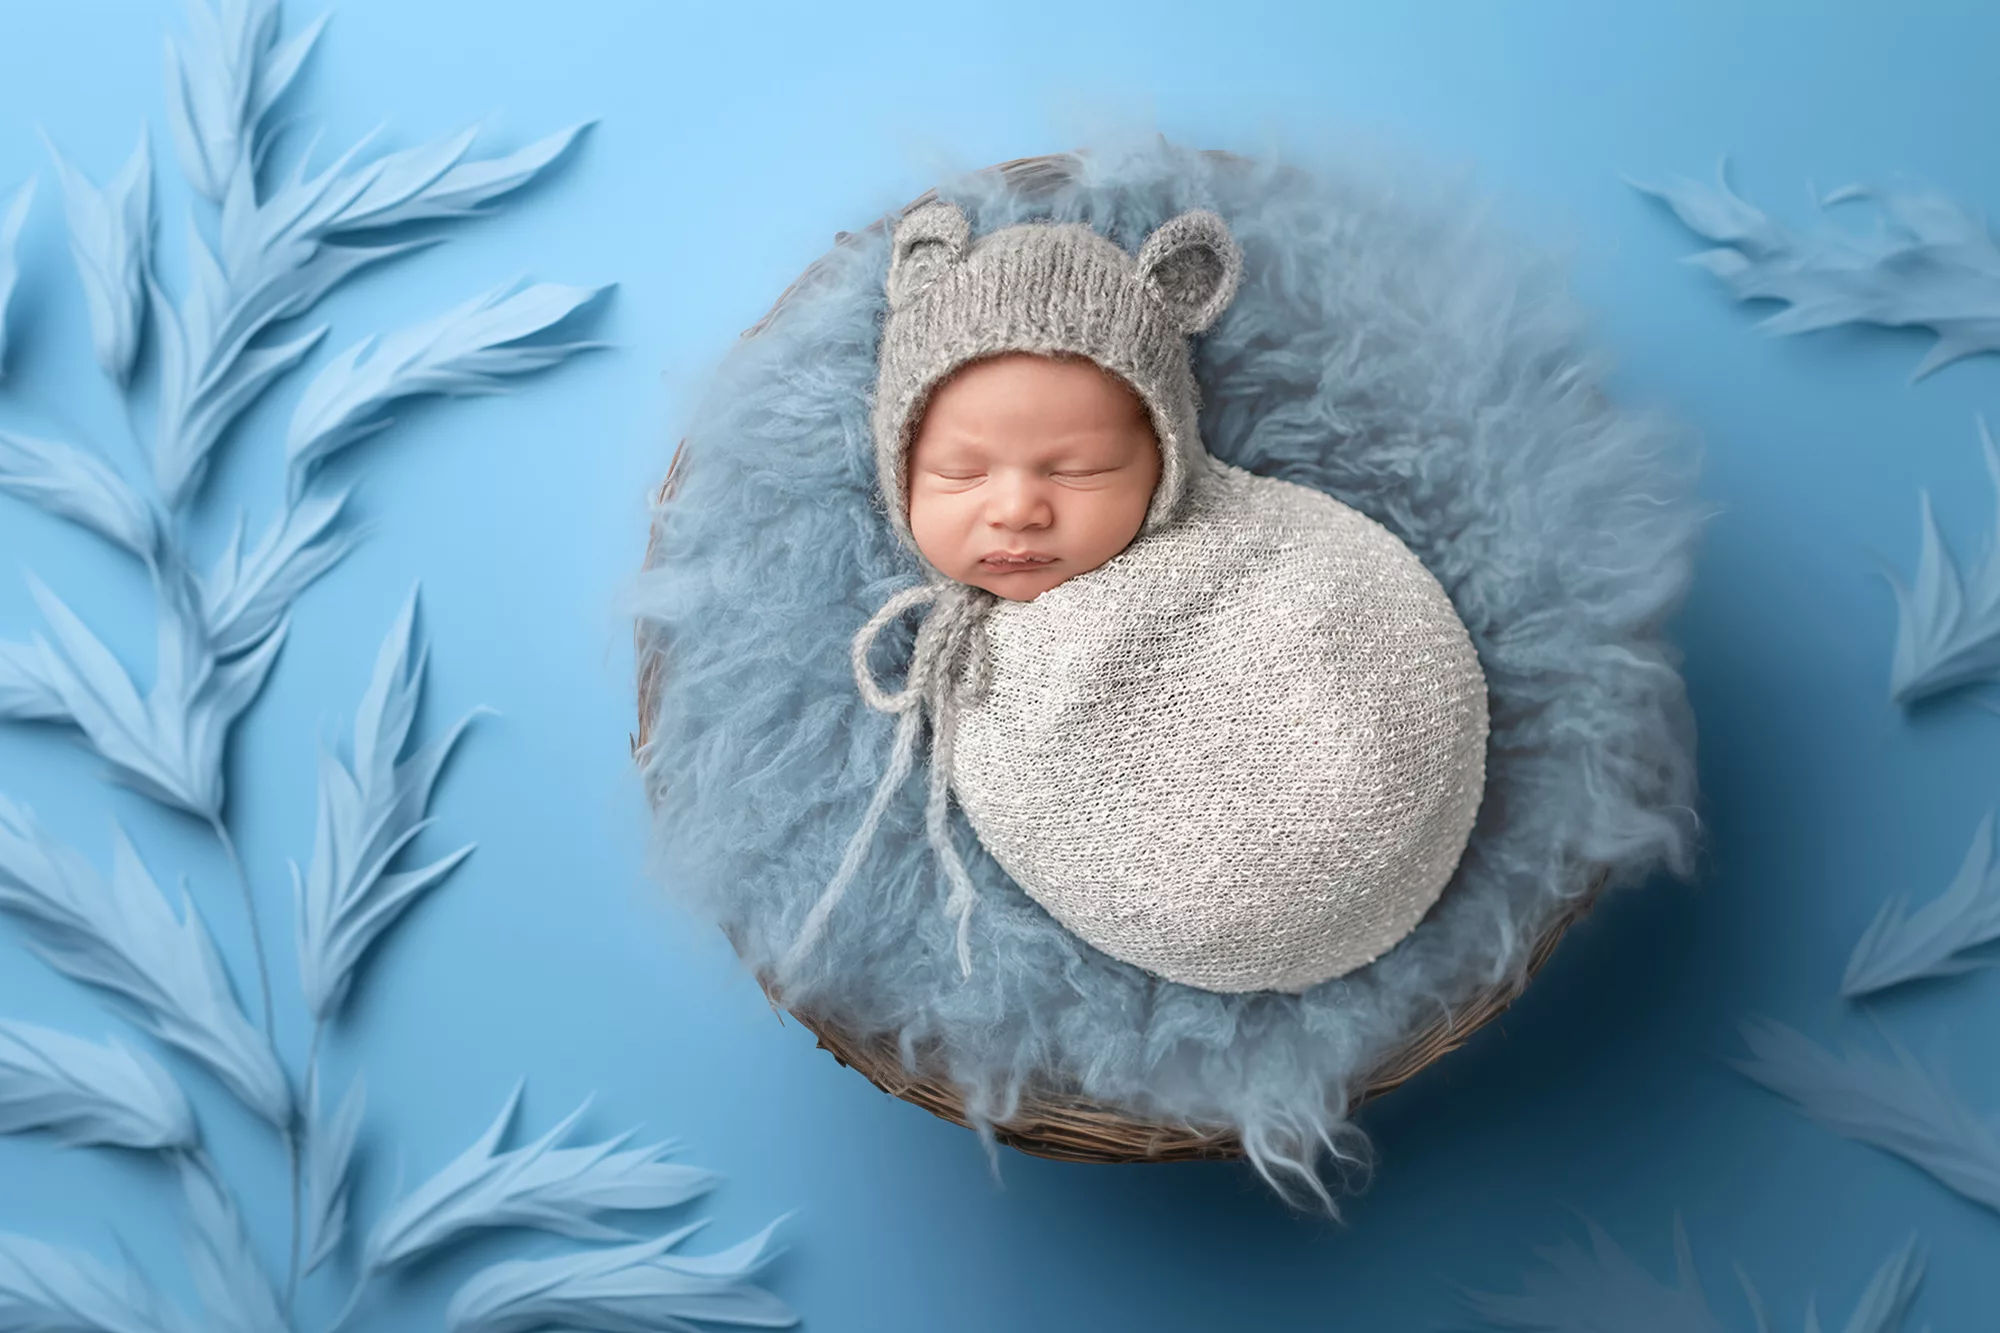 Wrapped Newborn Boy with a gray bear hat laying in a bowl of blue fur on a blue background with blue feathers